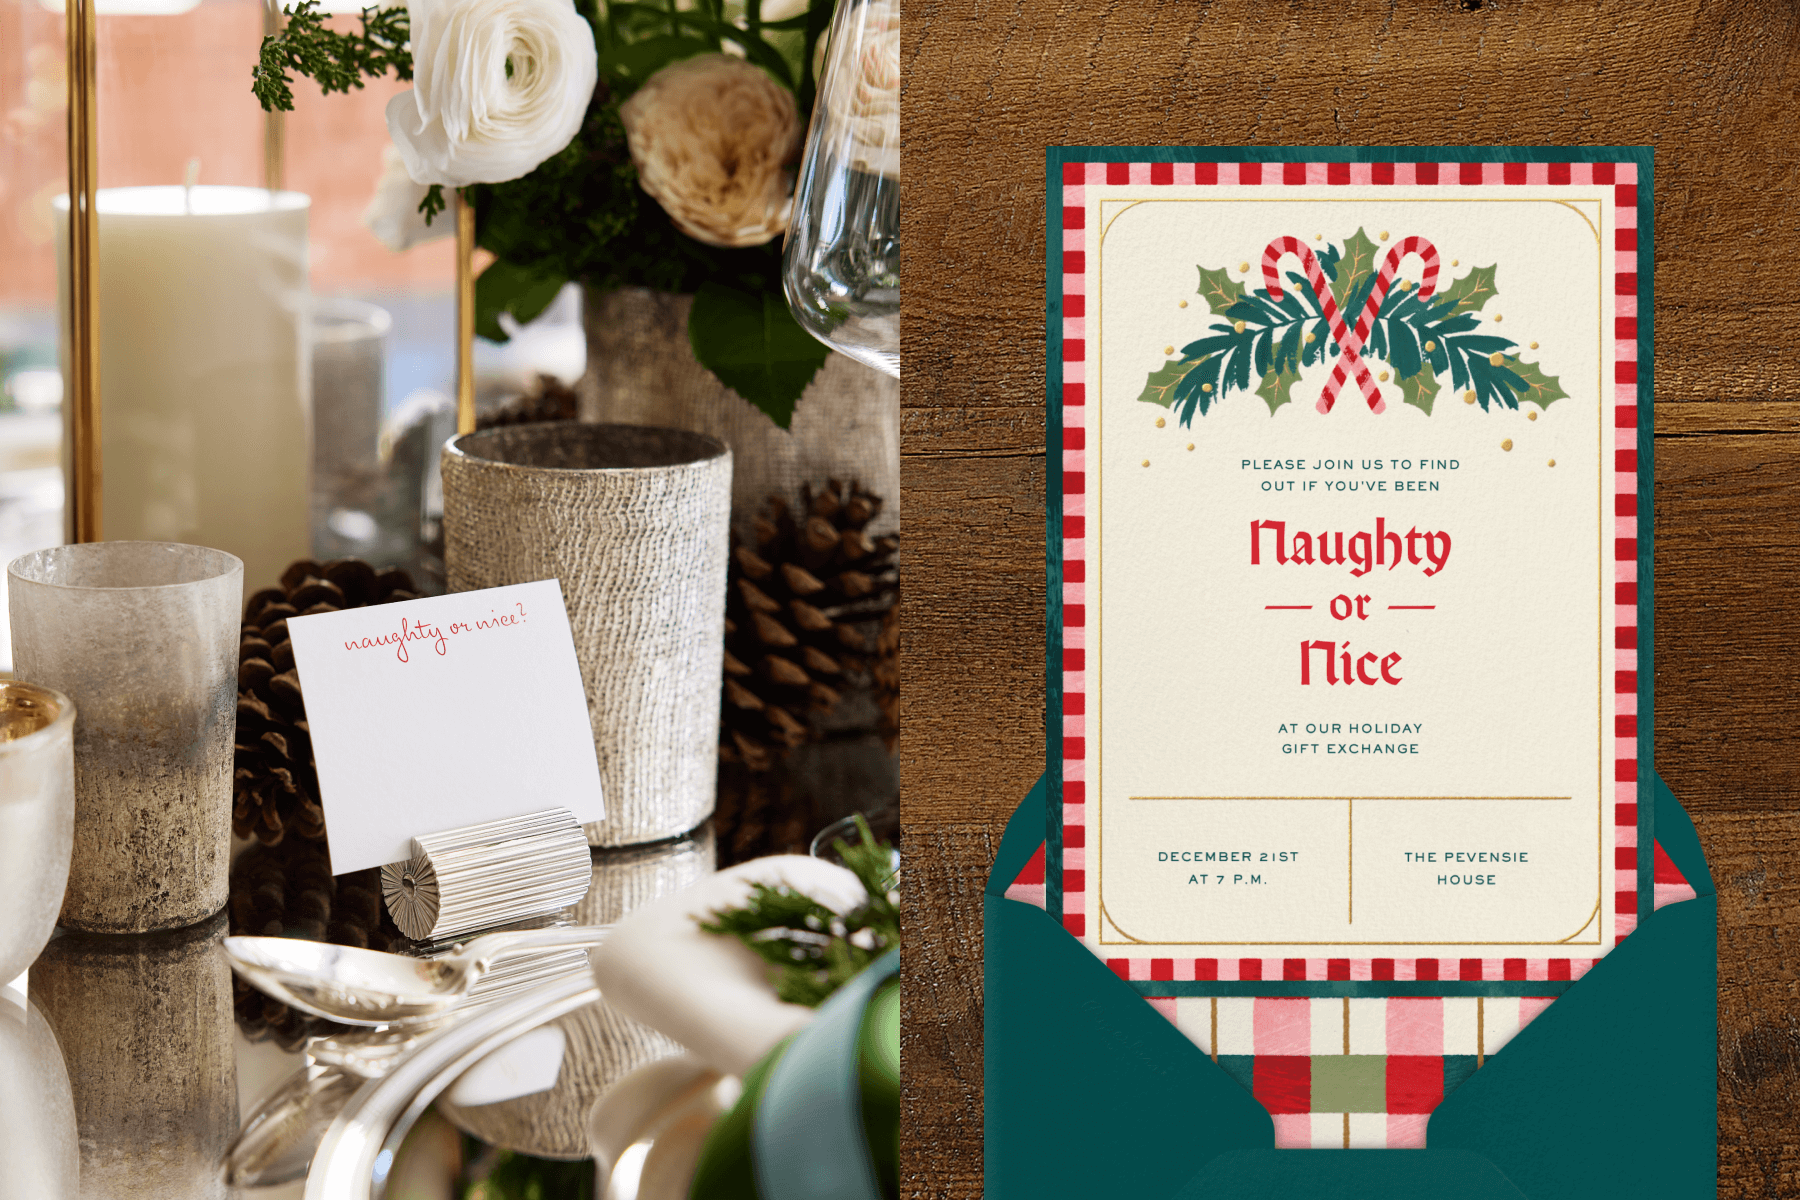 A name card at a wintery table reads “naughty or nice?”; an invitation with a candy cane-inspired border and candy cane and holly flourish at the top says “naughty or nice.”